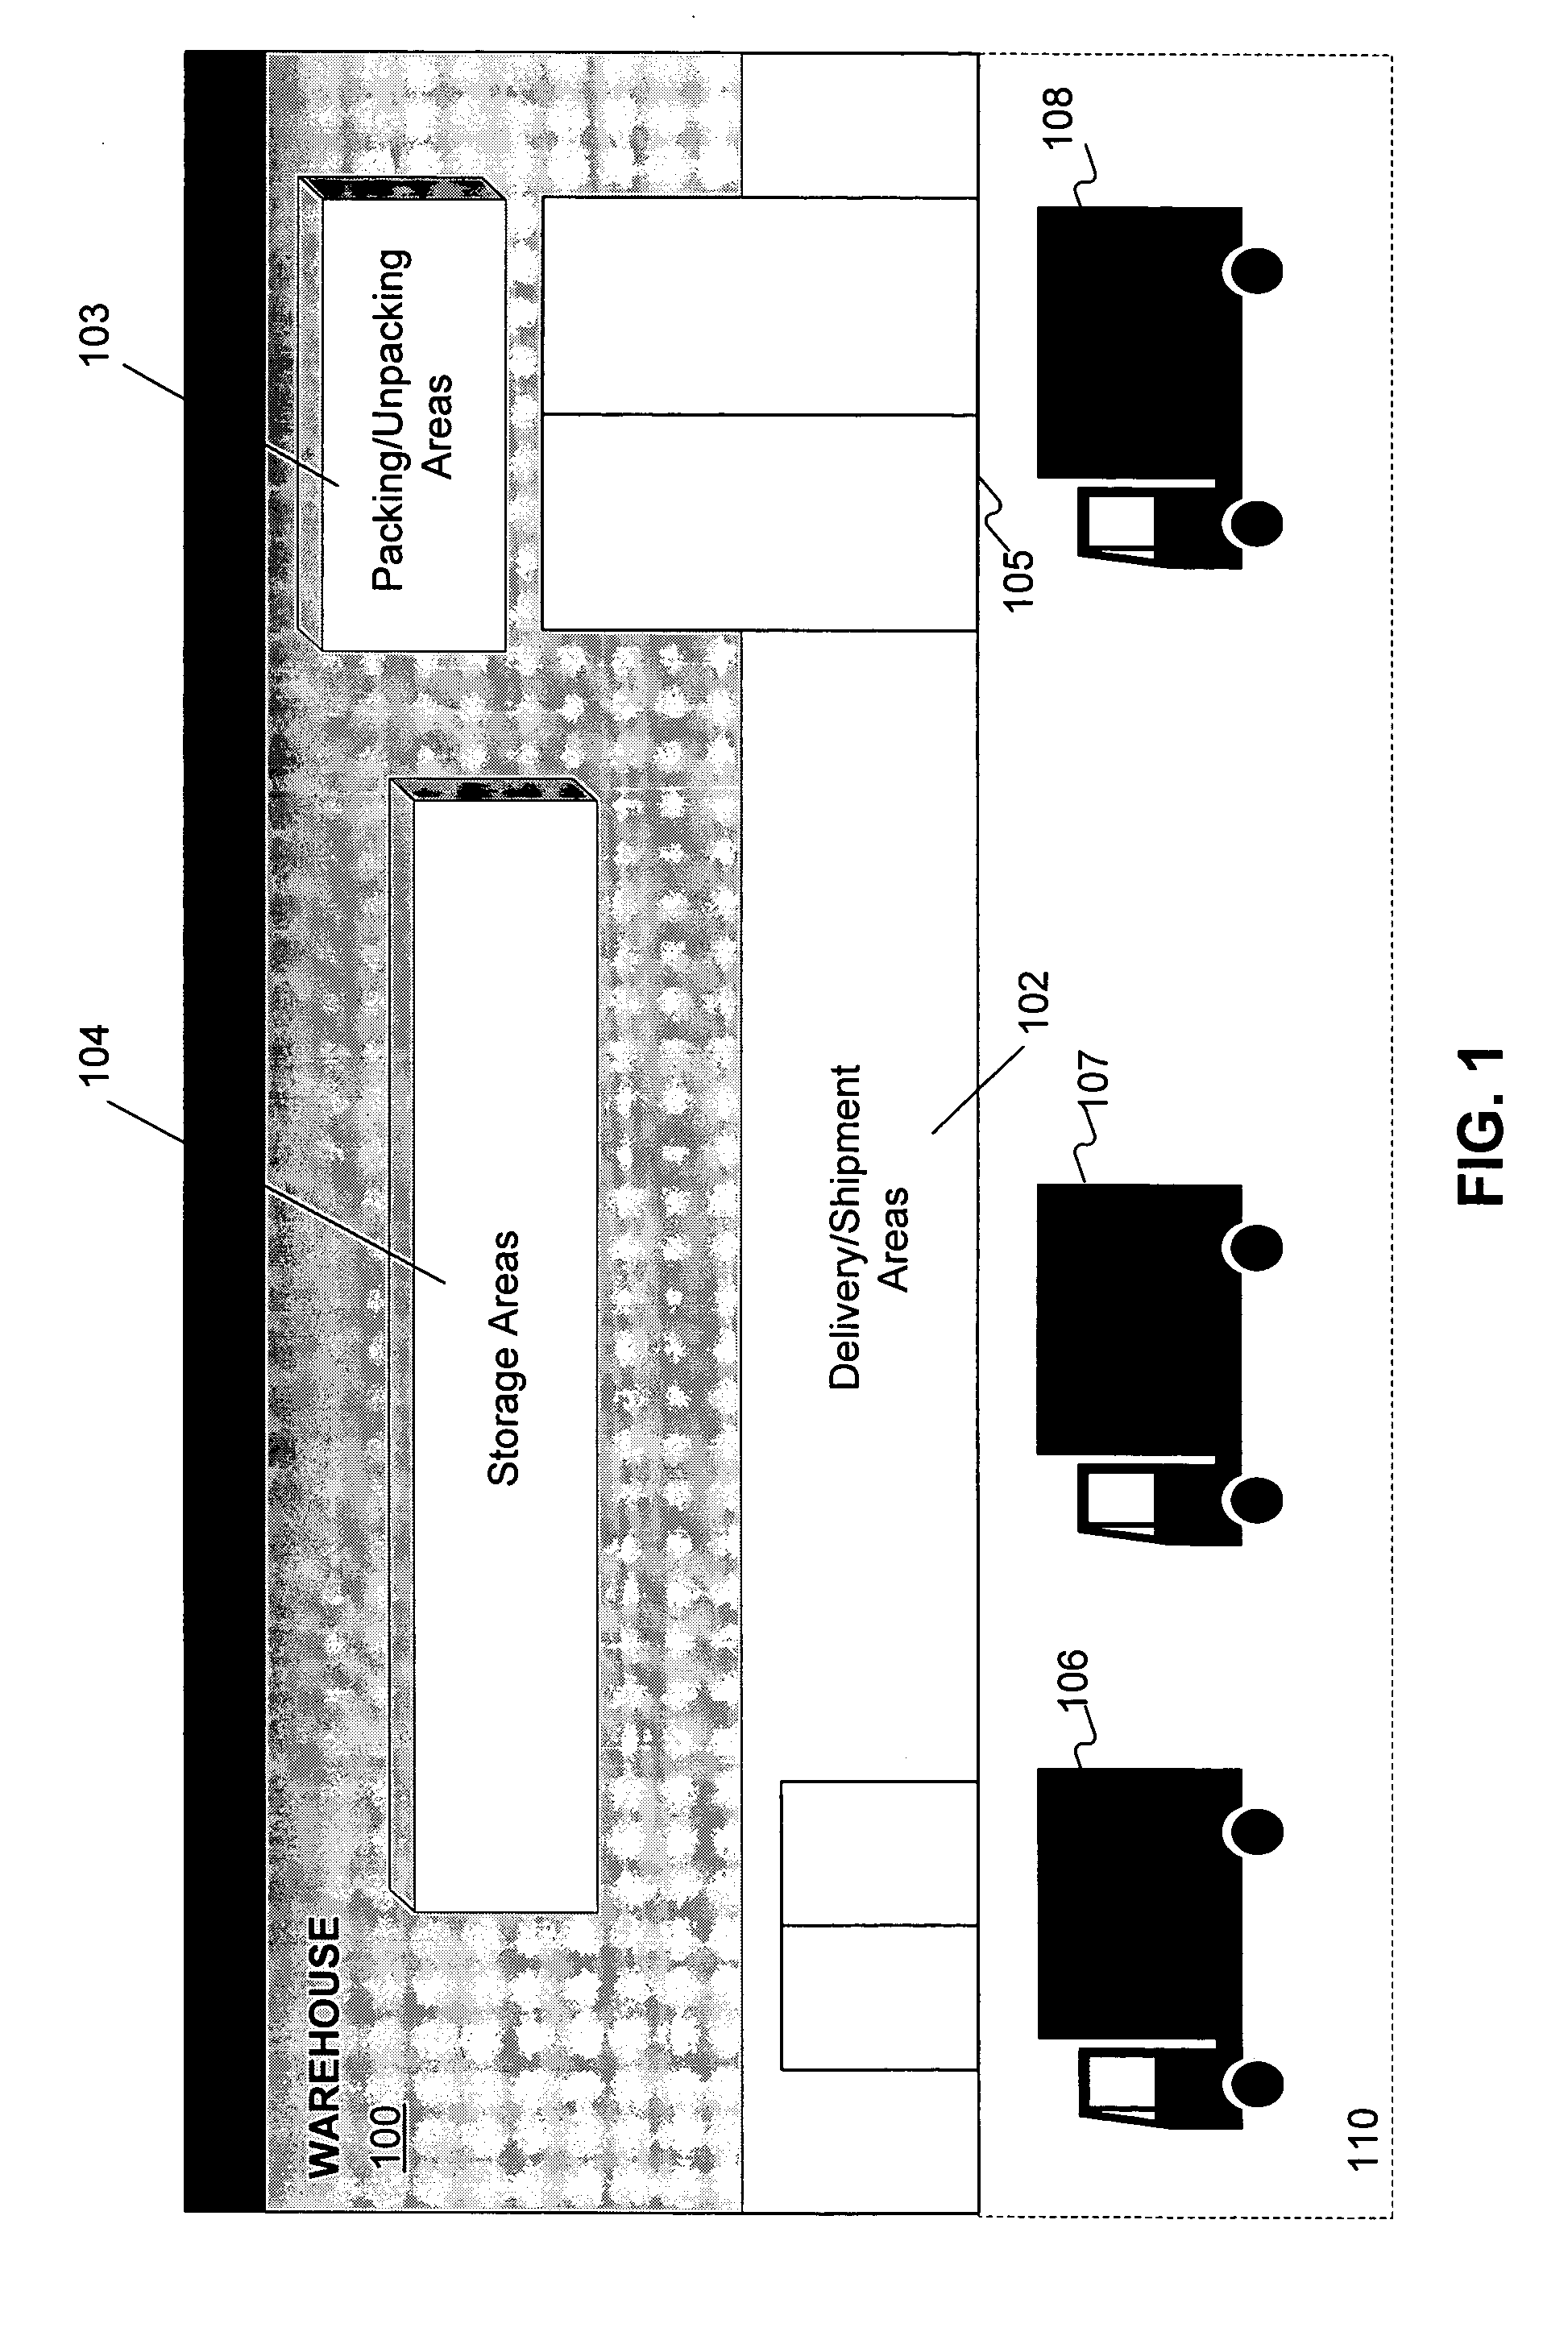 Methods and systems for managing stock transportation